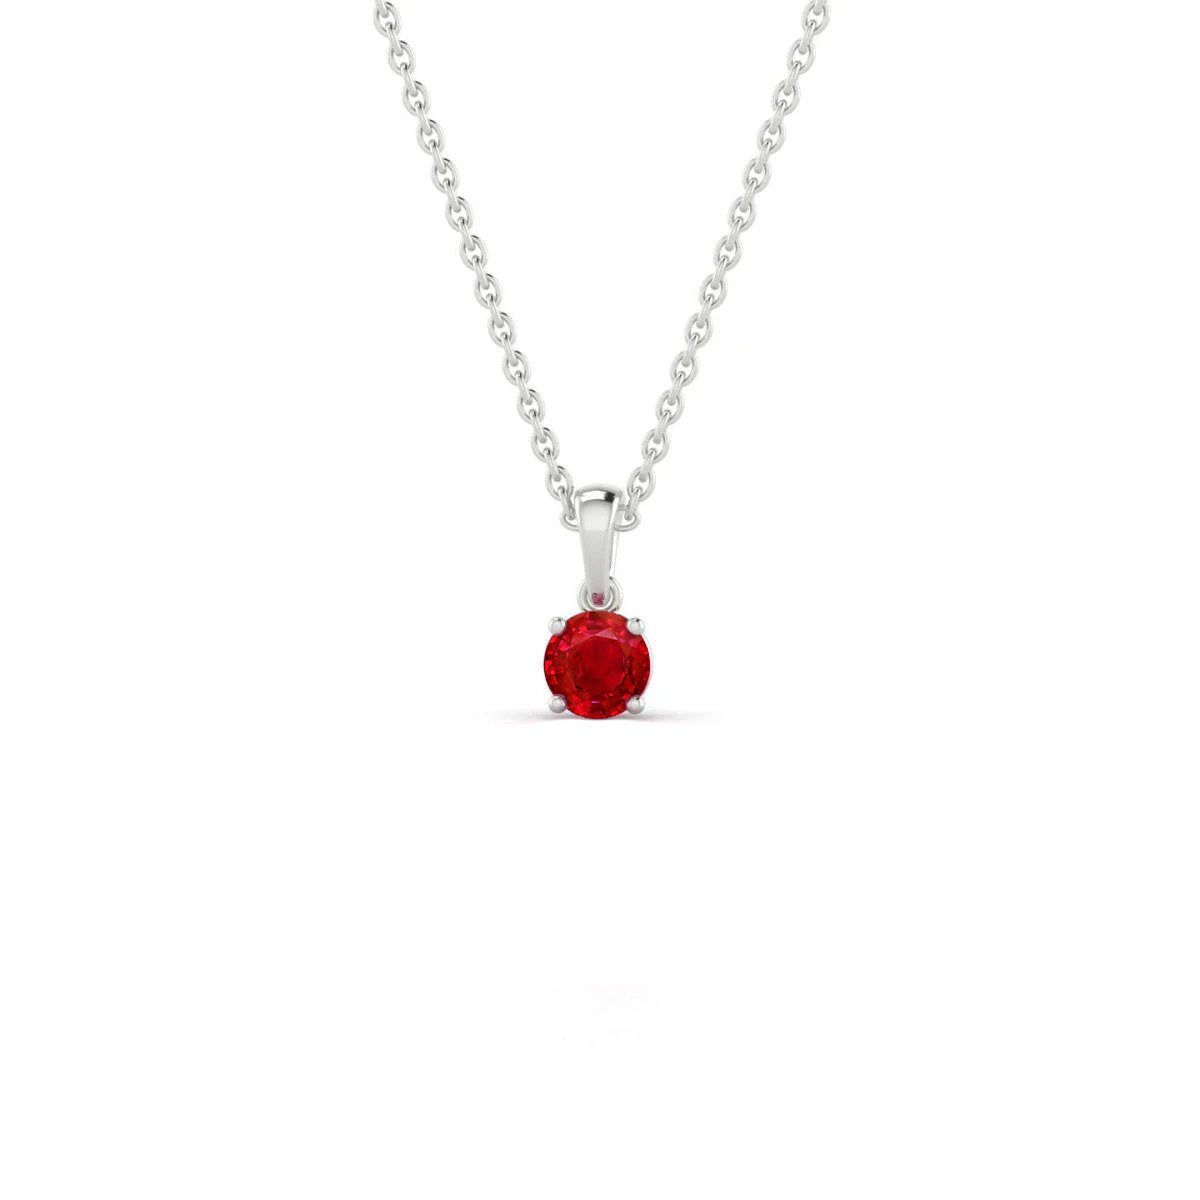 Solitaire 3 Ct. Red Ruby Pendant Necklace White God 14K - Gemstone Pendant-harrychadent.ca